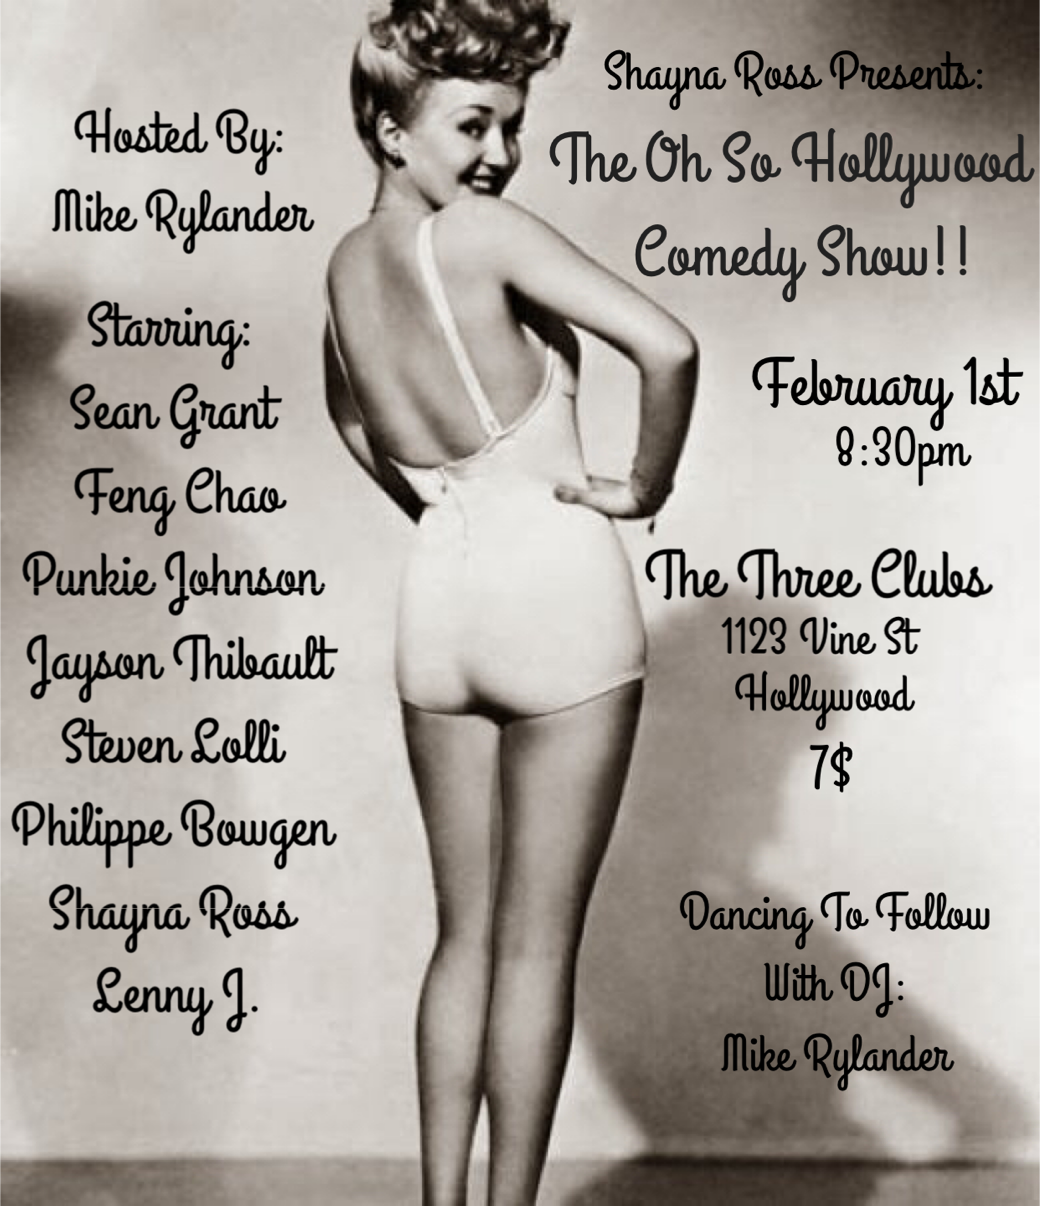 The Oh So Hollywood Comedy Show!!